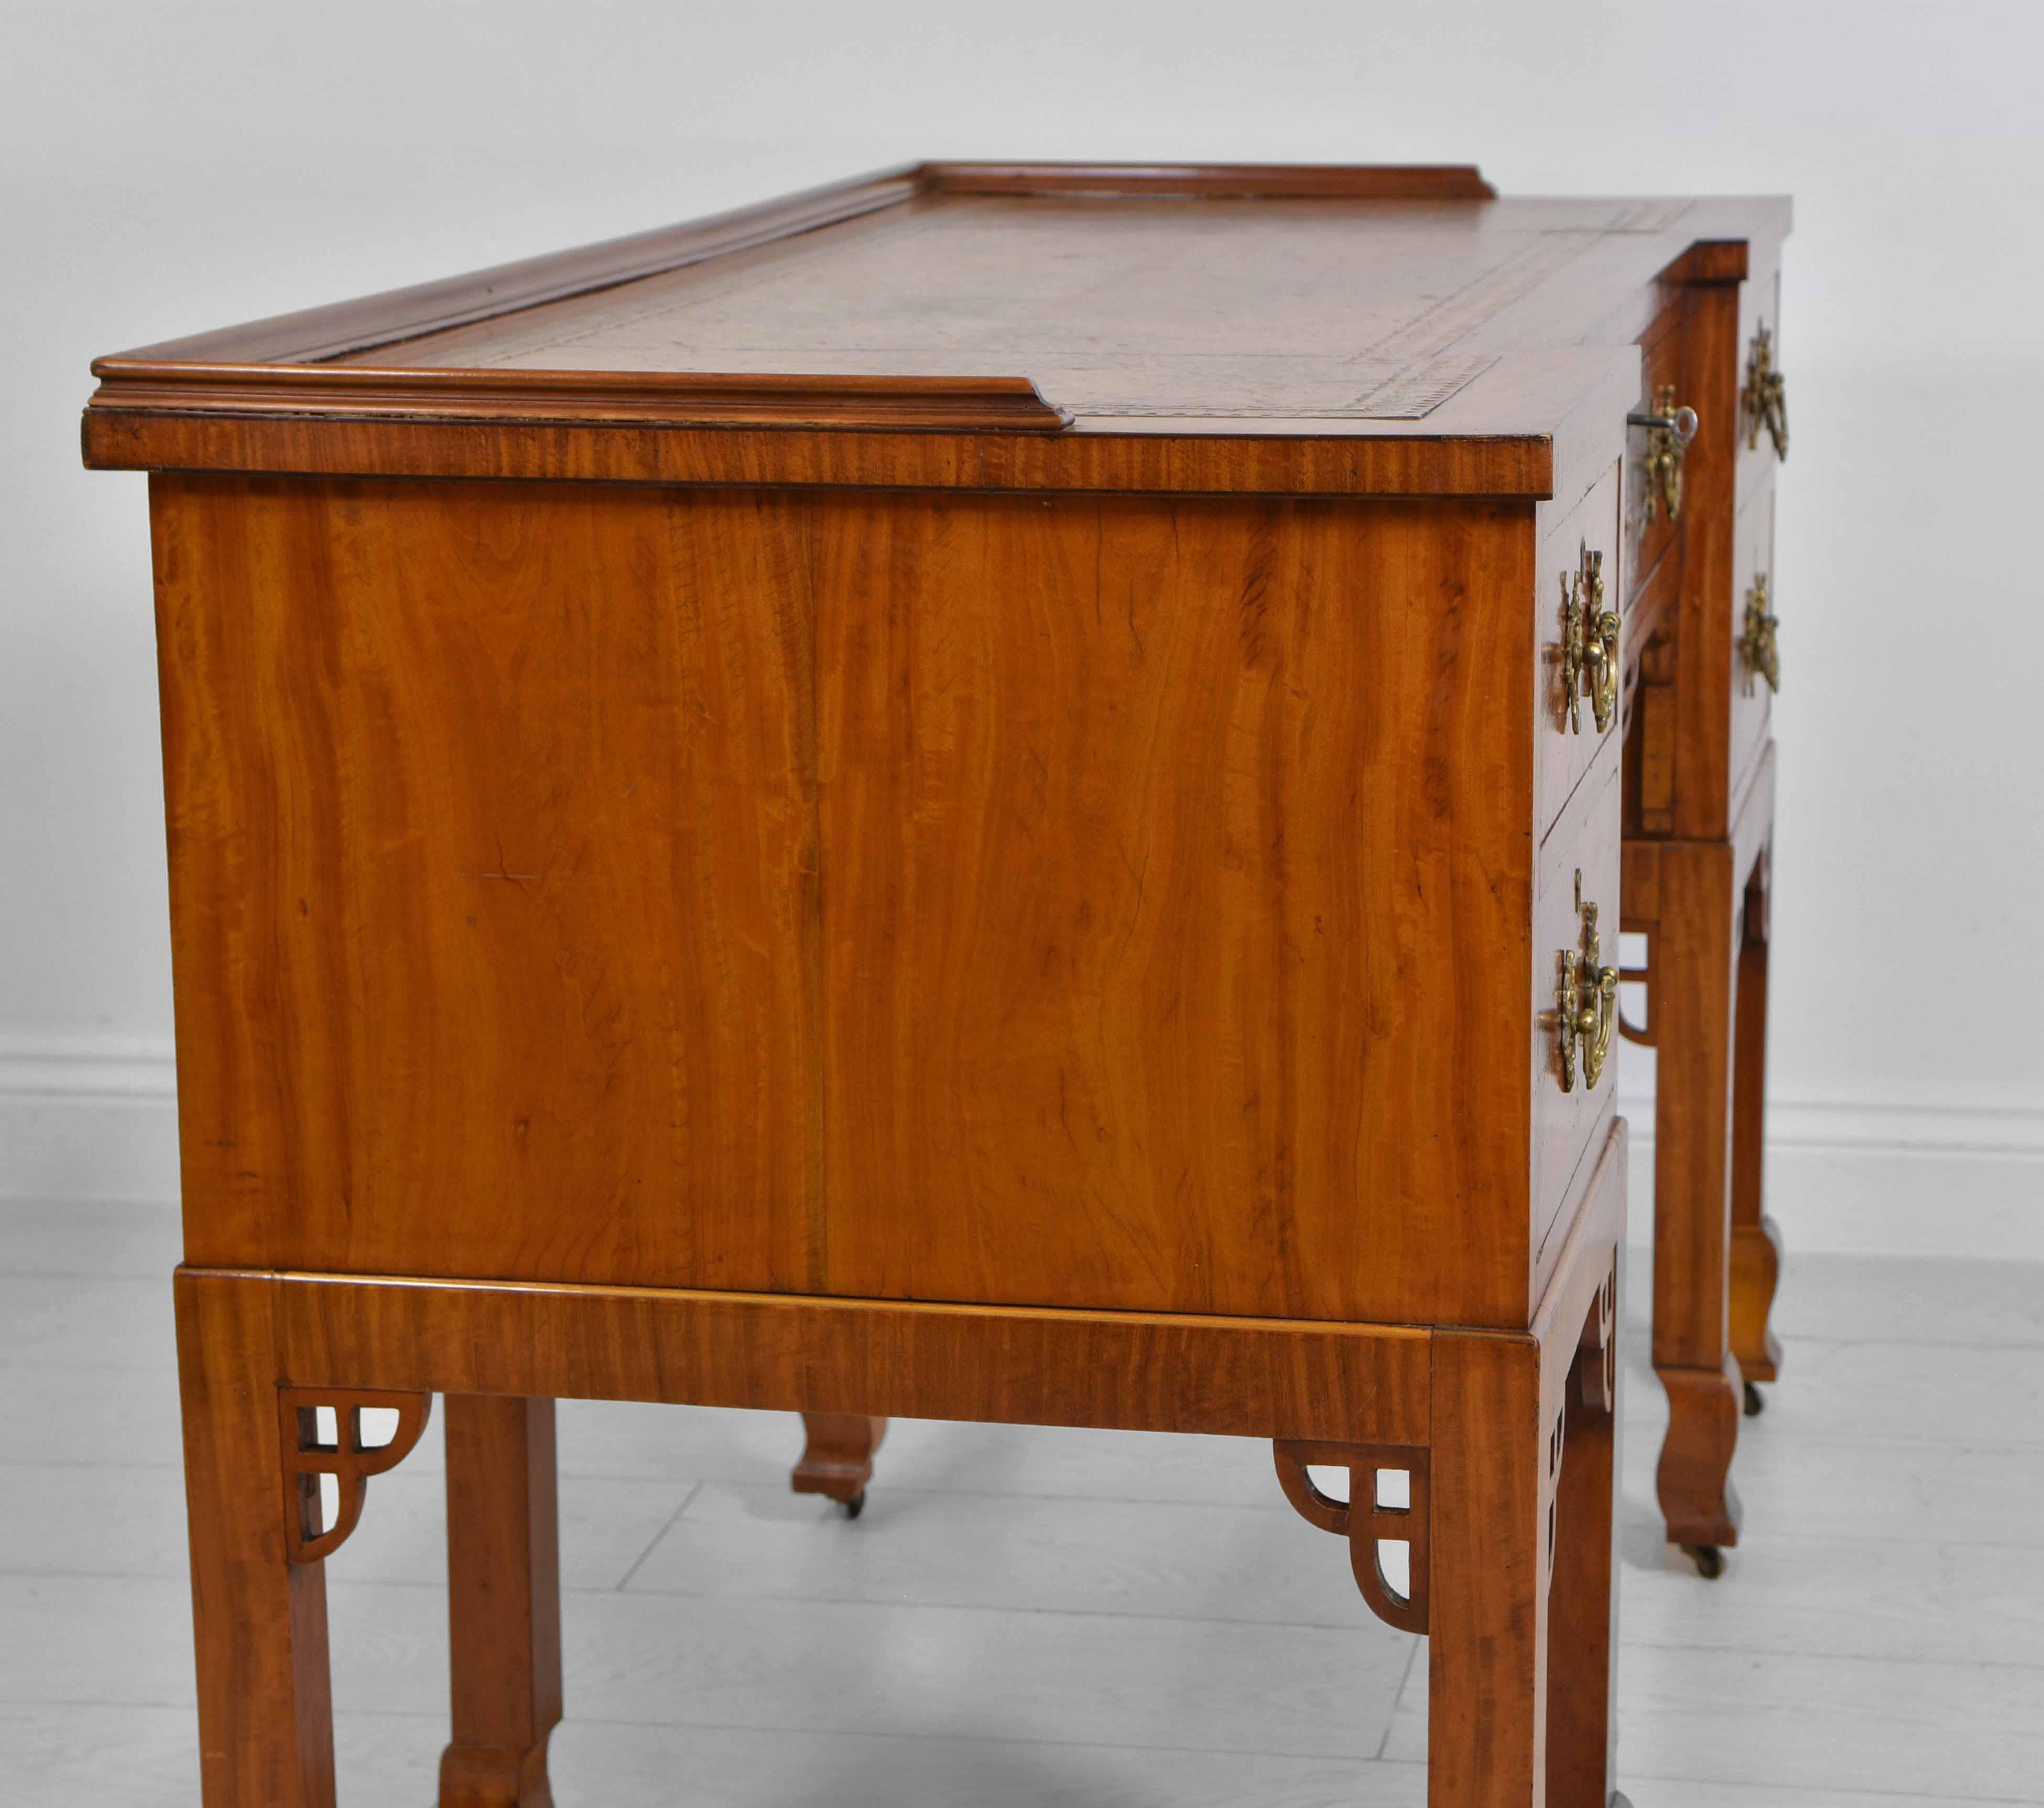 Antique English Satinwood Desk in the Japanese Manner circa 1900 For Sale 5